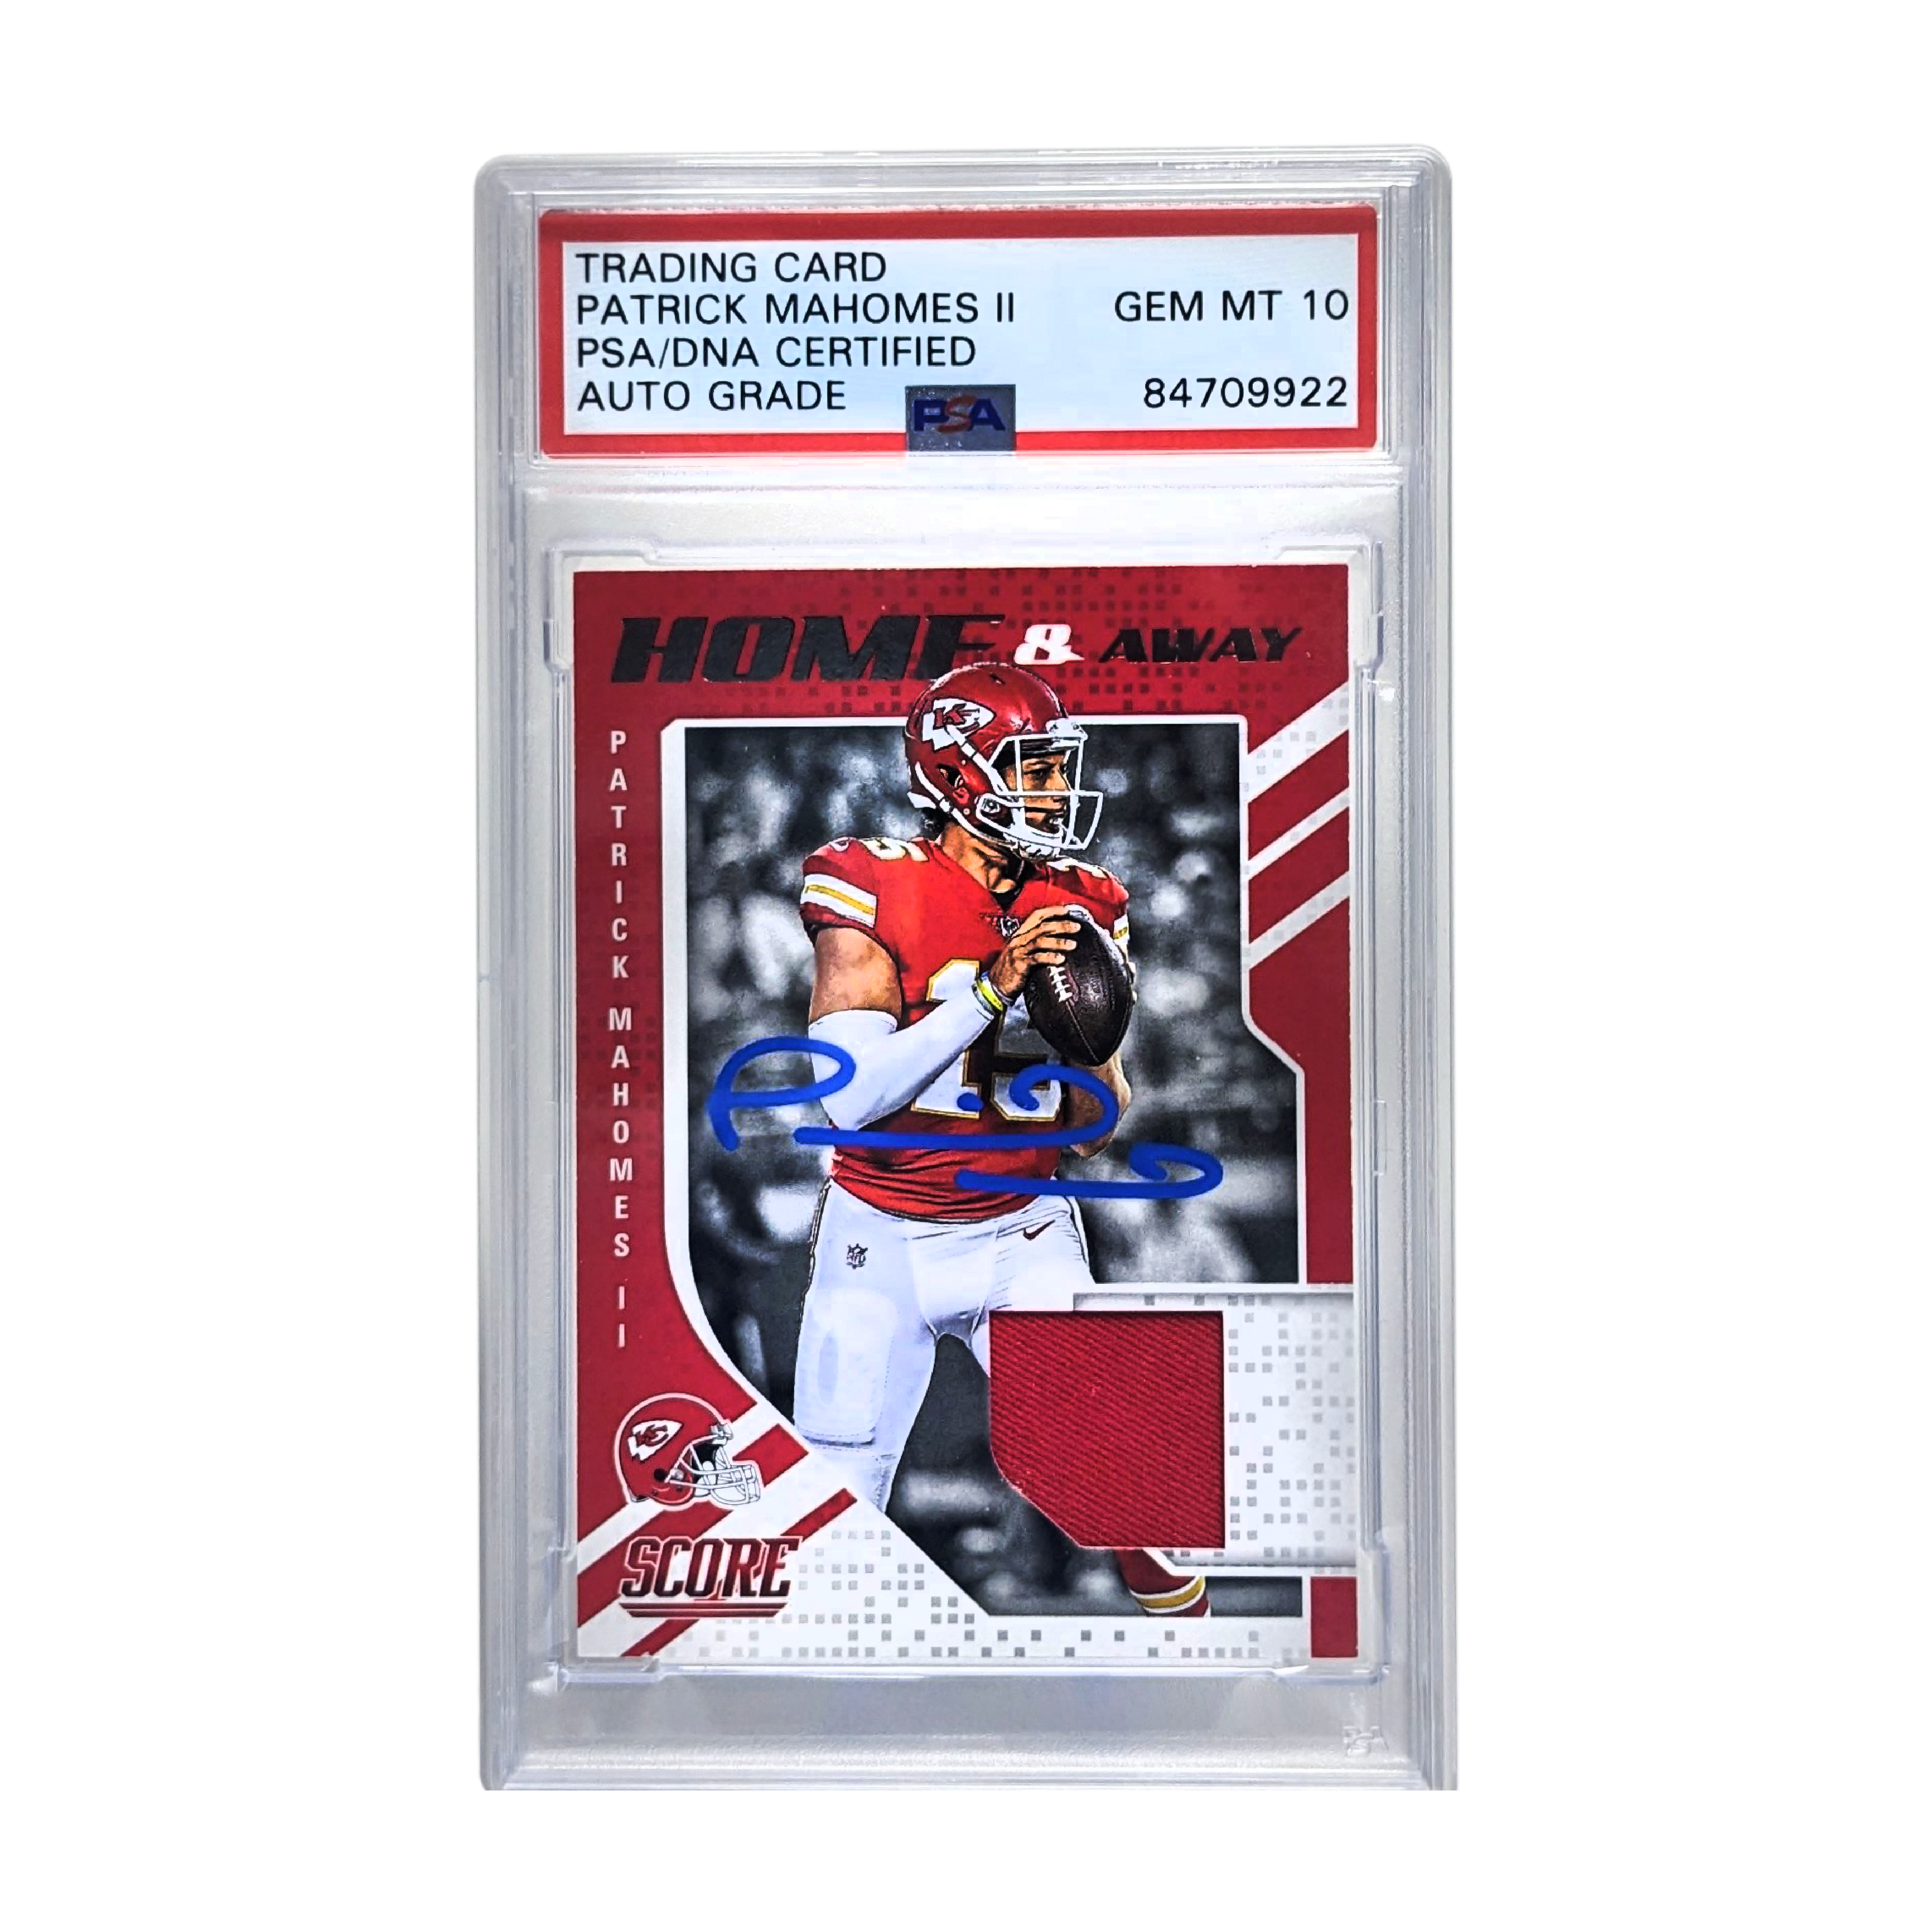 Patrick Mahomes II College Rookie Jersey Card